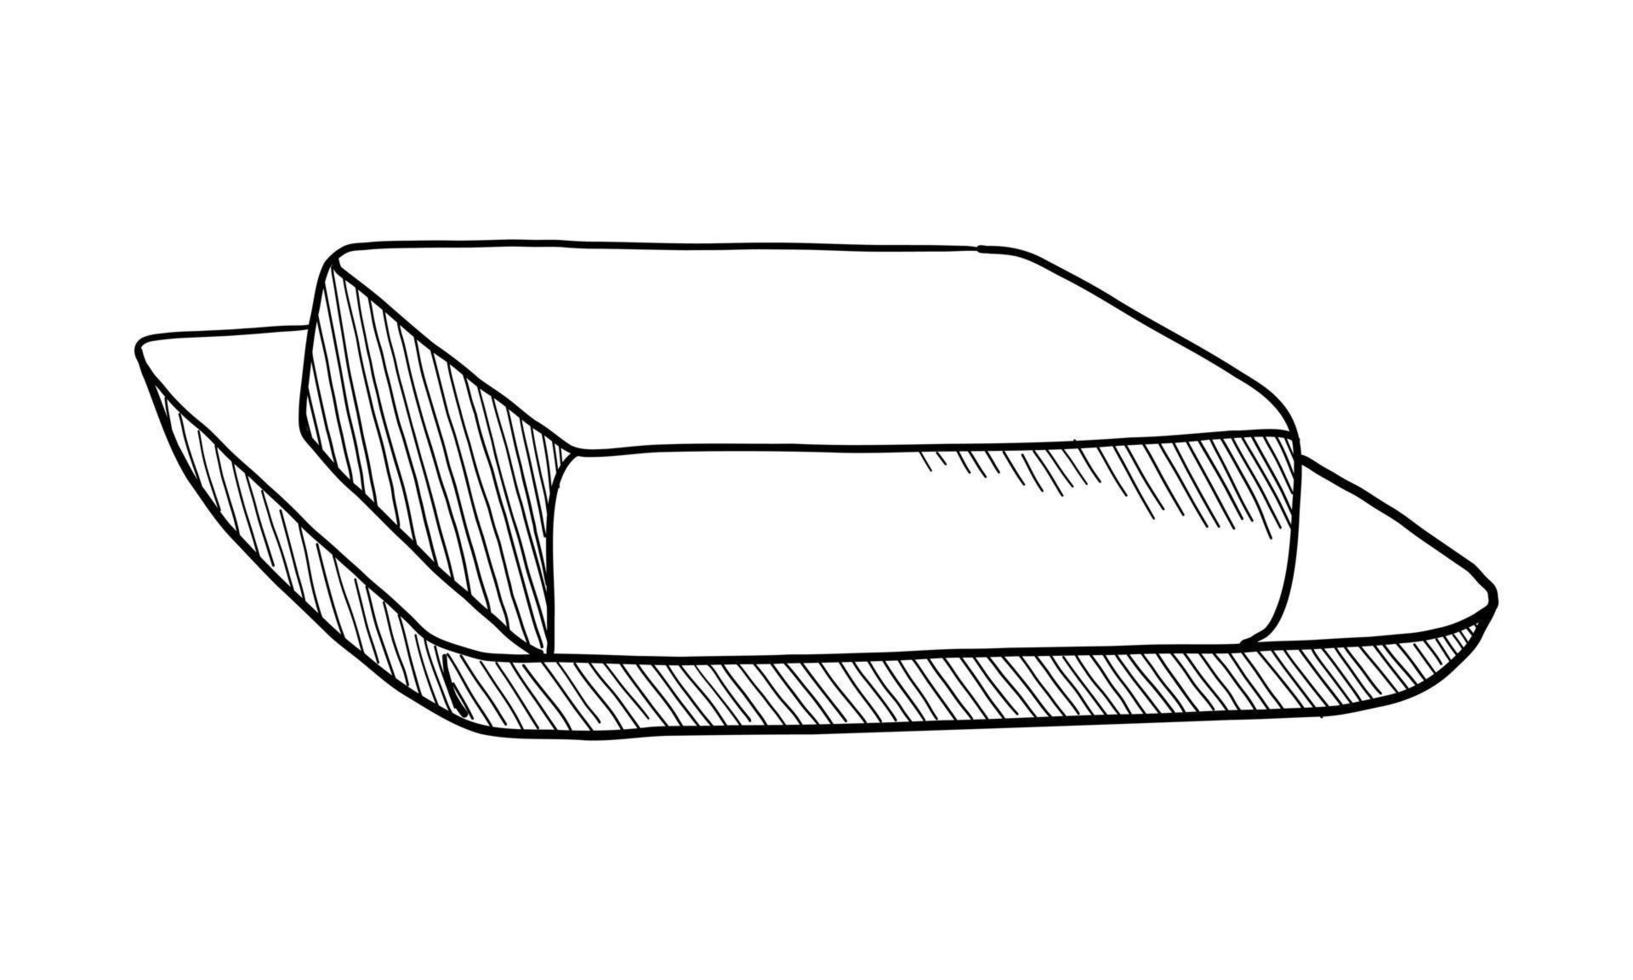 VECTOR CONTOUR DRAWING OF A PIECE OF BUTTER ON A PLATE ON A WHITE BACKGROUND